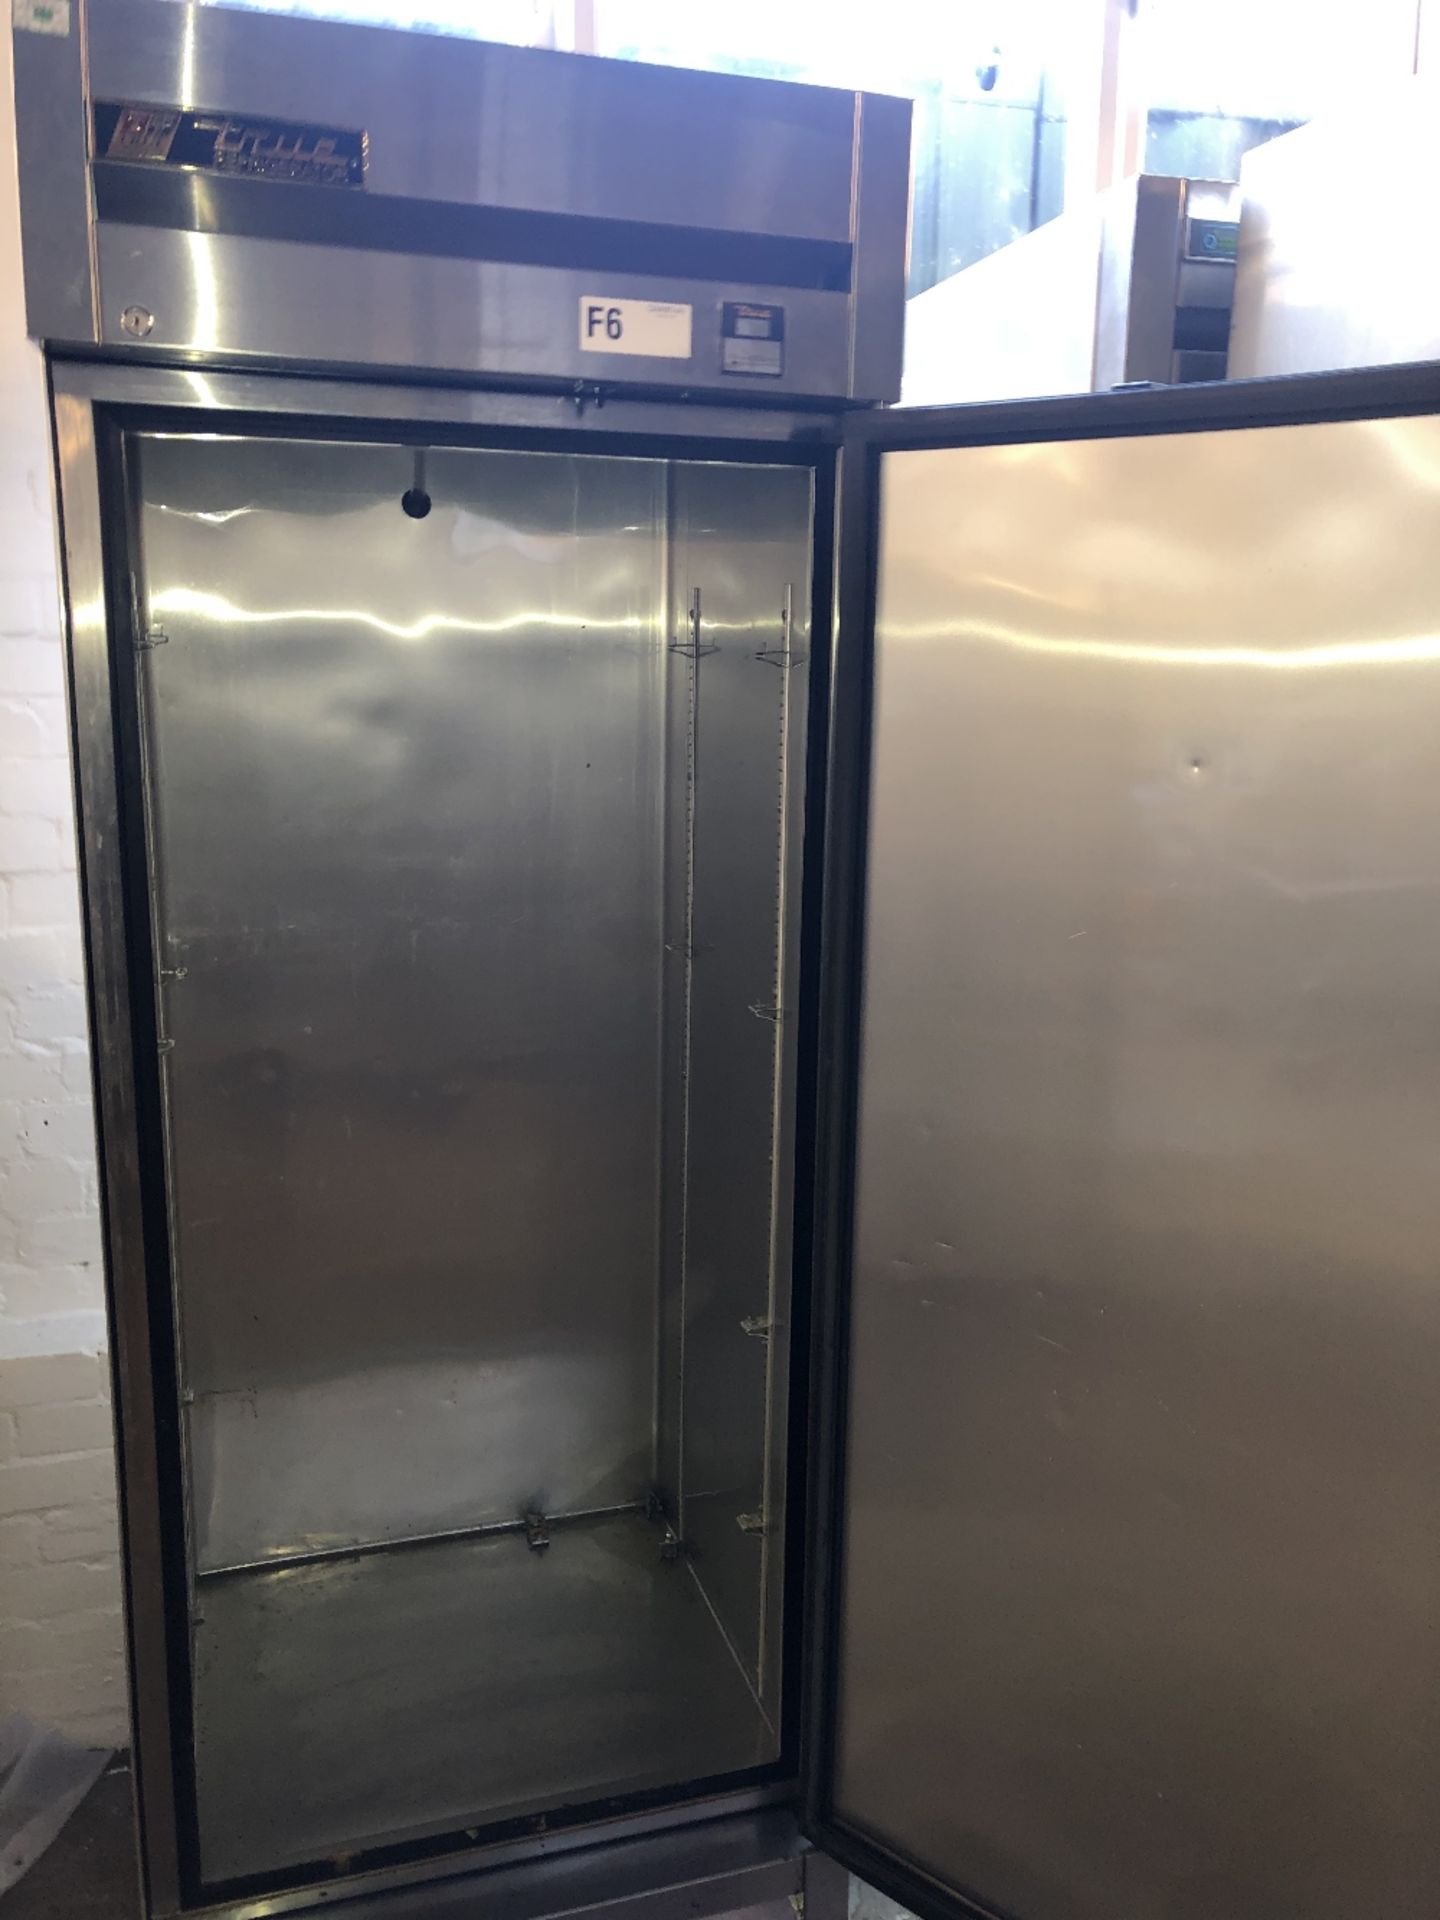 True Refrigeration T-19E-HC Upright Commercial Stainless Steel Fridge - Image 3 of 3